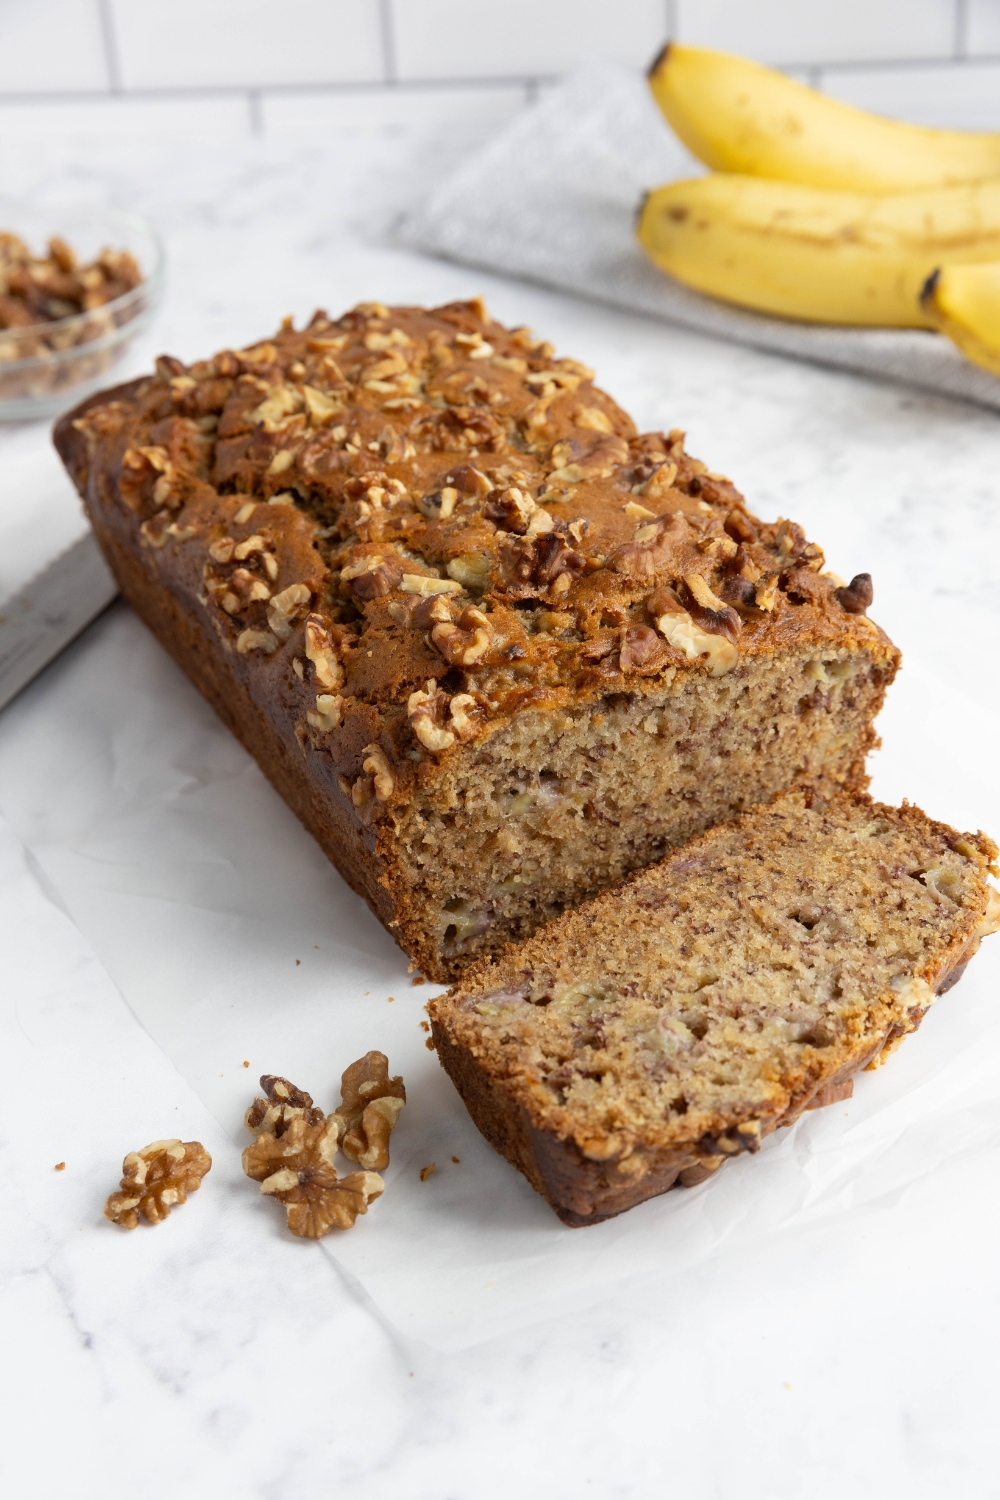 A loaf of banana bread being cut into slices.